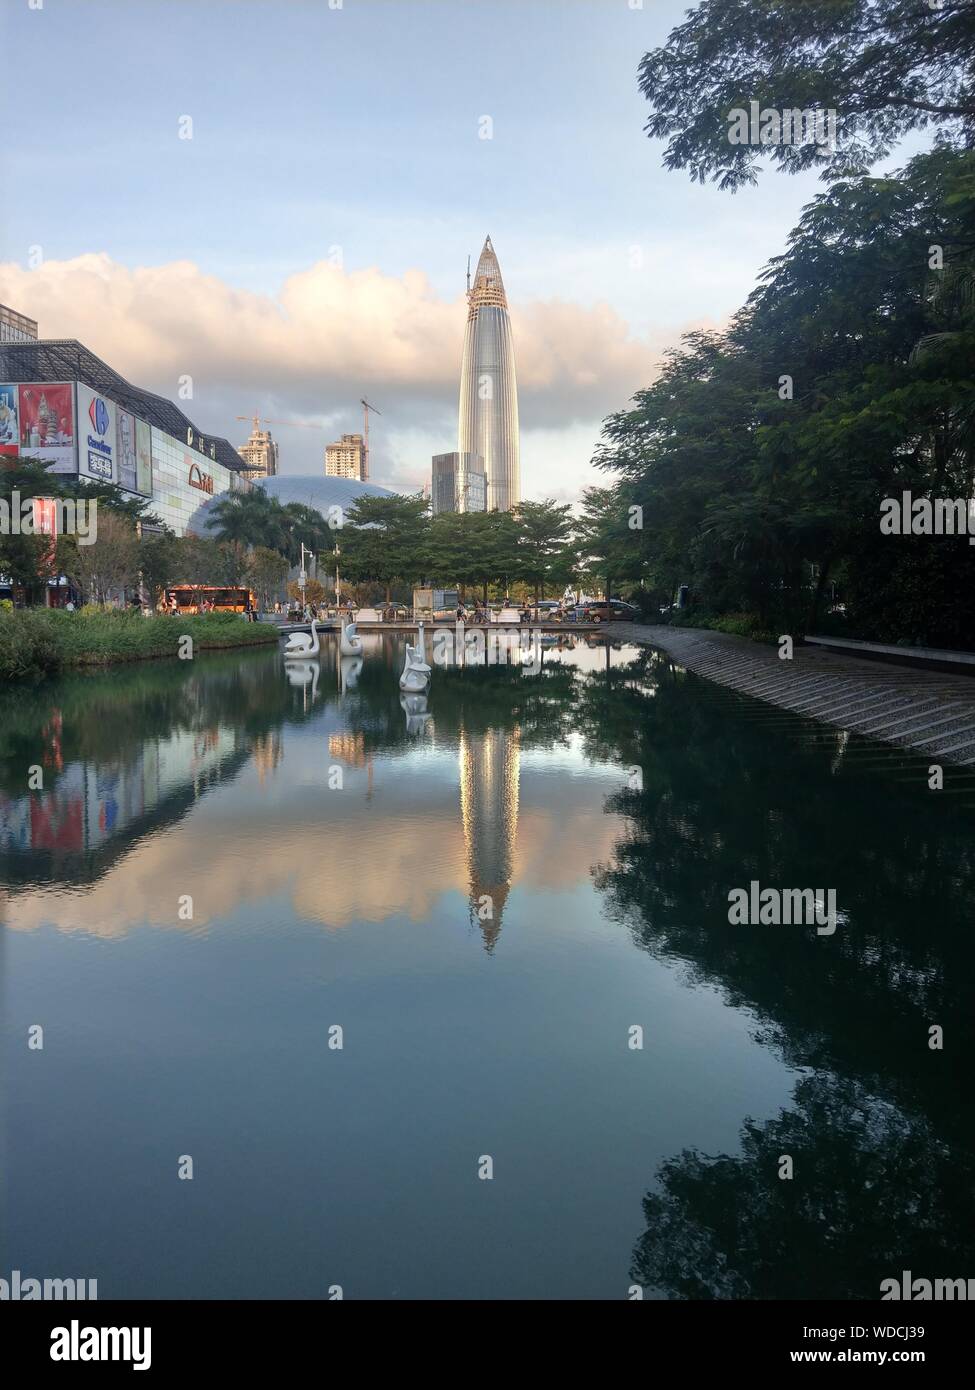 Reflection Of Tower In Water Stock Photo